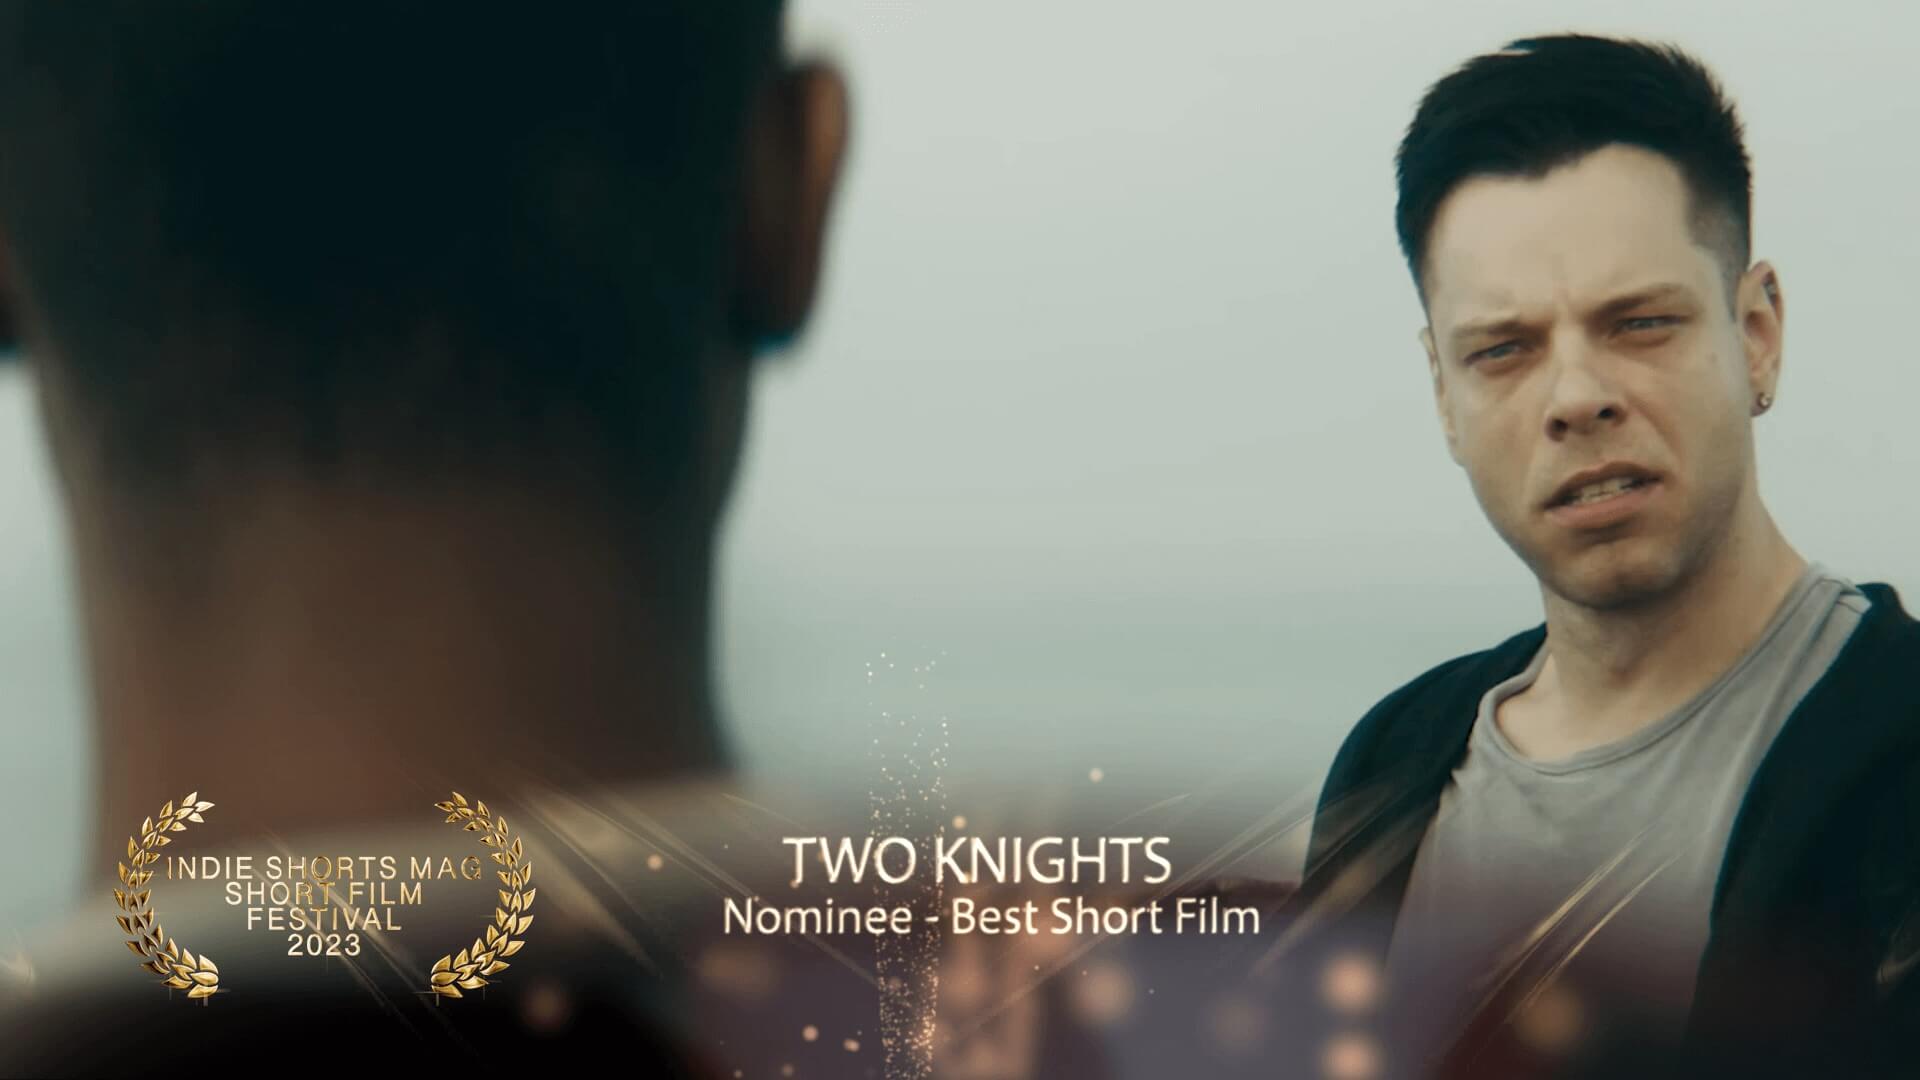 Indie Shorts Mag Short Film Festival - Best Short Film - Nominee - Two Knights